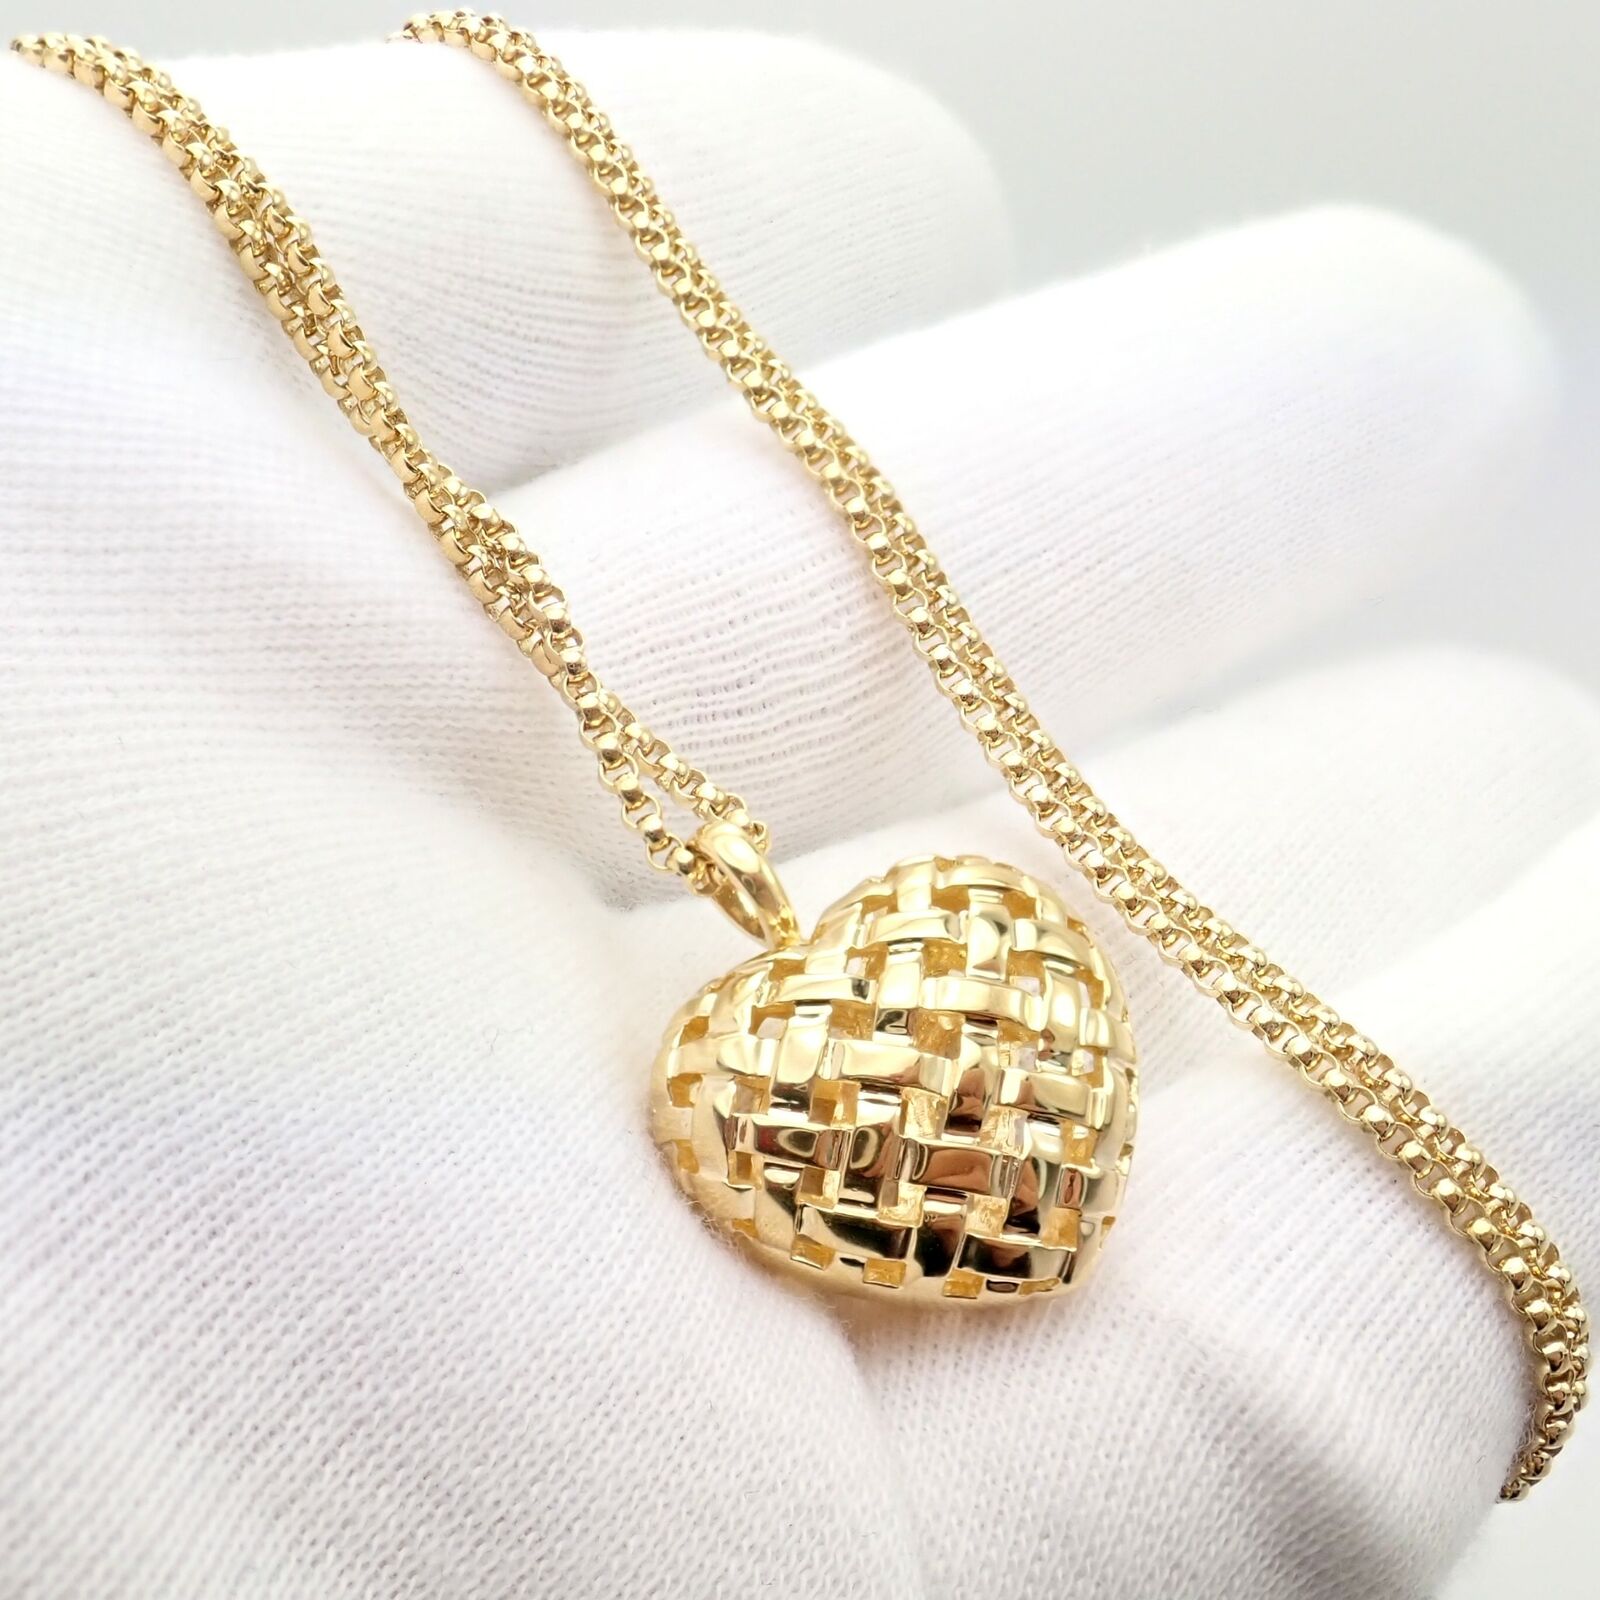 Tiffany & Co. Jewelry & Watches:Fine Jewelry:Necklaces & Pendants Vintage Tiffany & Co 18k Yellow Gold Vannerie Basket Heart Necklace 30" 1996